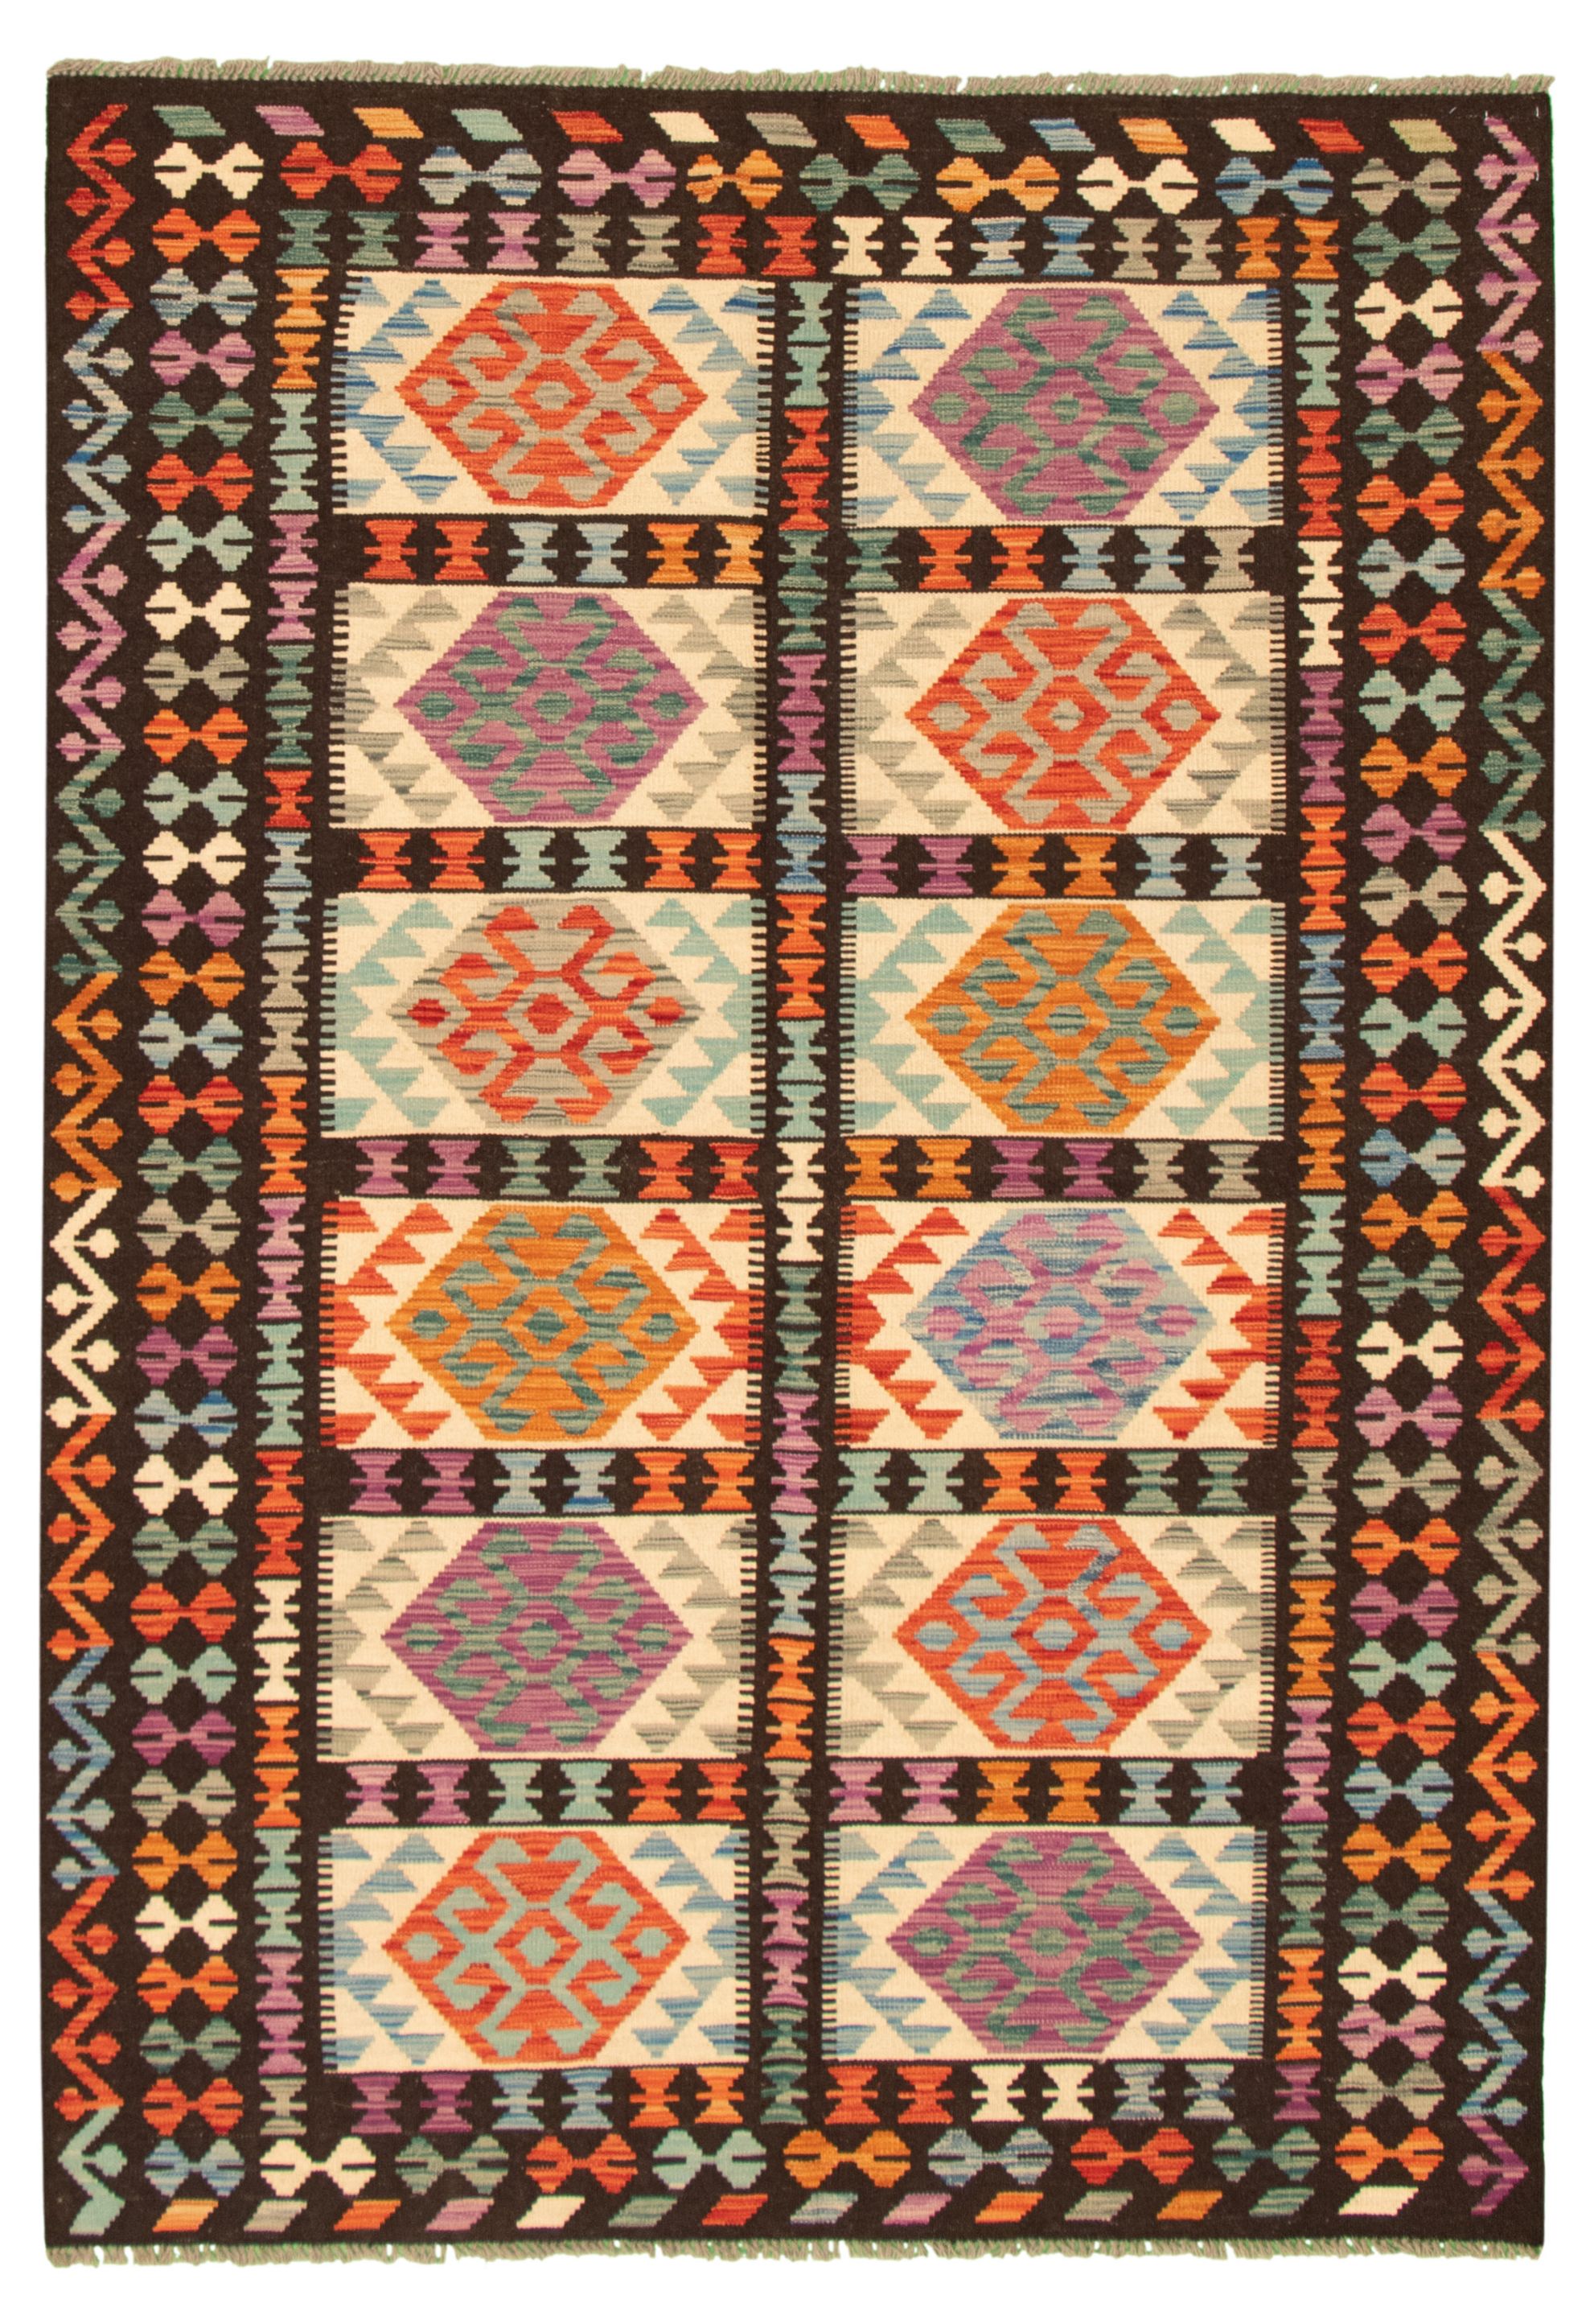 Hand woven Bold and Colorful  Ivory, Red Wool Kilim 5'10" x 8'3" Size: 5'10" x 8'3"  